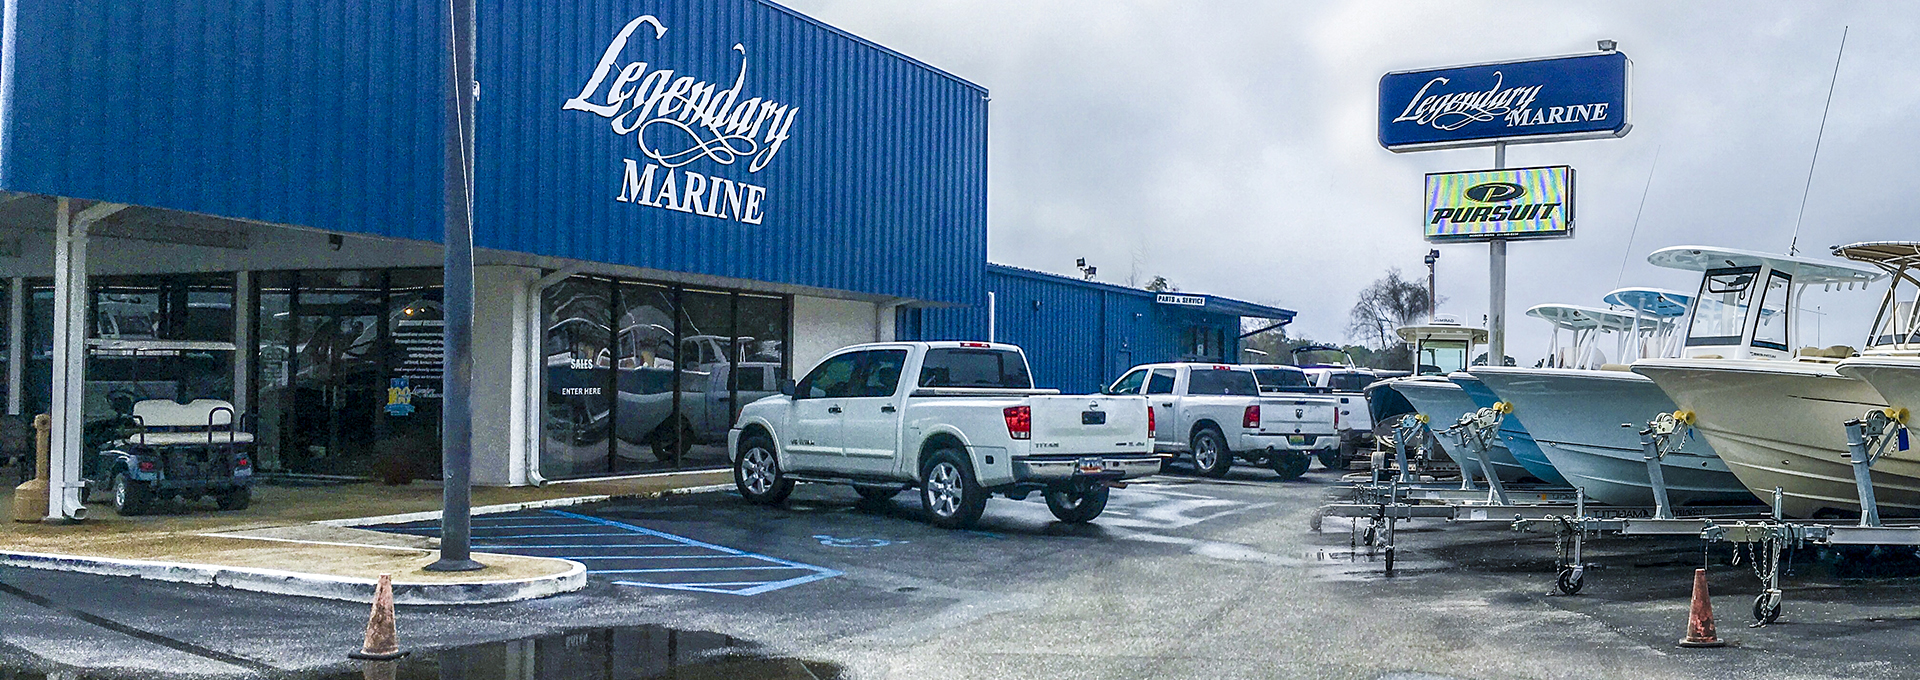 Store front image for the dealership located at Gulf Shores, AL